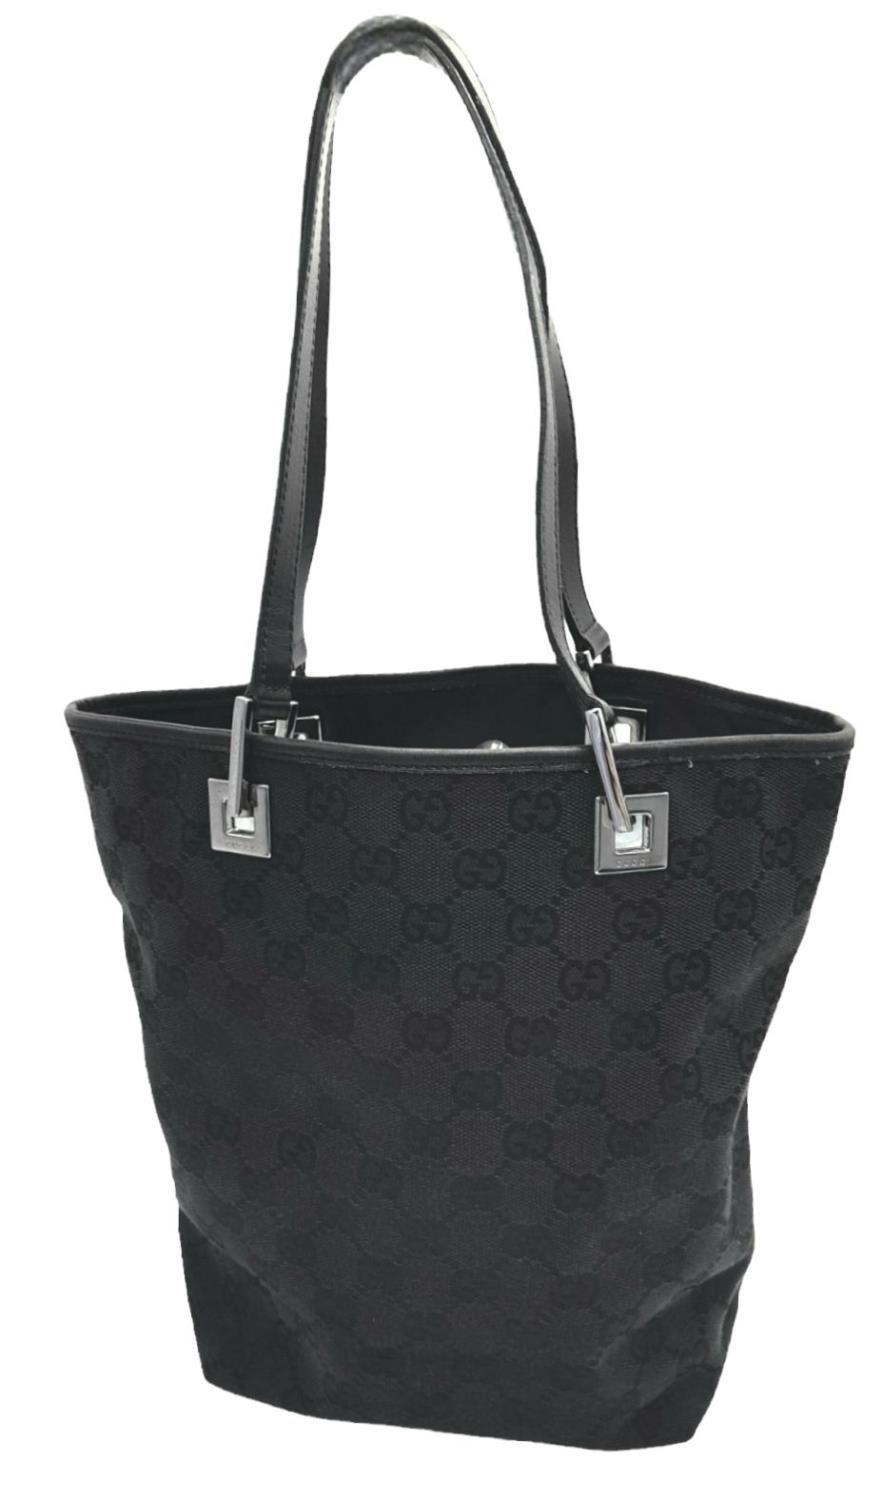 A Gucci Black Monogram Tote Bag. Canvas exterior with leather trim, two leather straps and silver-